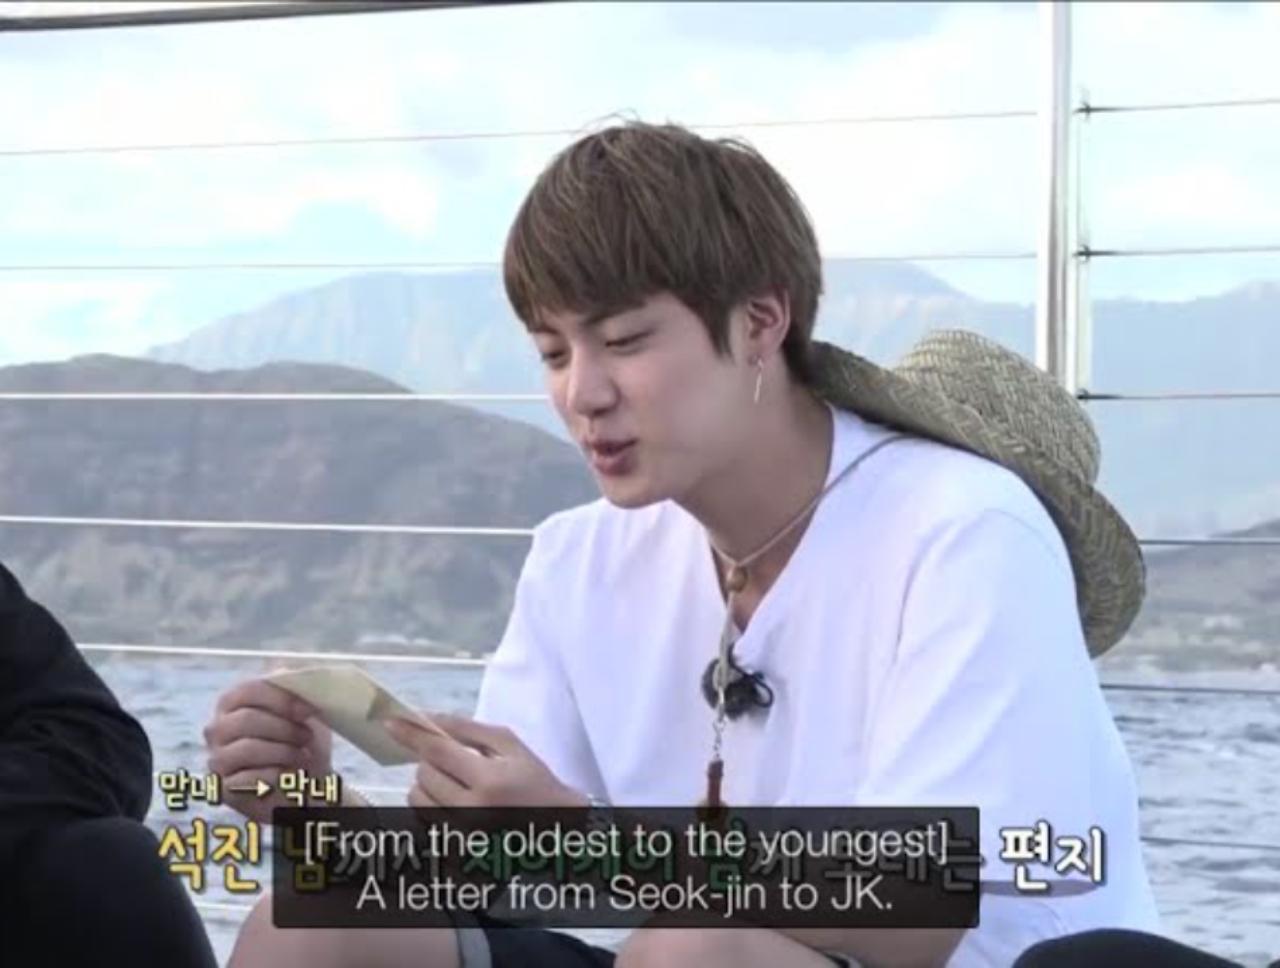 Jin wrote to his youngest brother Jungkook and thanked him for bringing energy and enthusiasm to the team. He also thanked him for patiently teaching him dance moves, and for having the same 'mental age' as him. All the members rotationally wrote letters to each other - and the memories, love and shared journey of hardship embedded in the emotional notes moved everybody to tears!